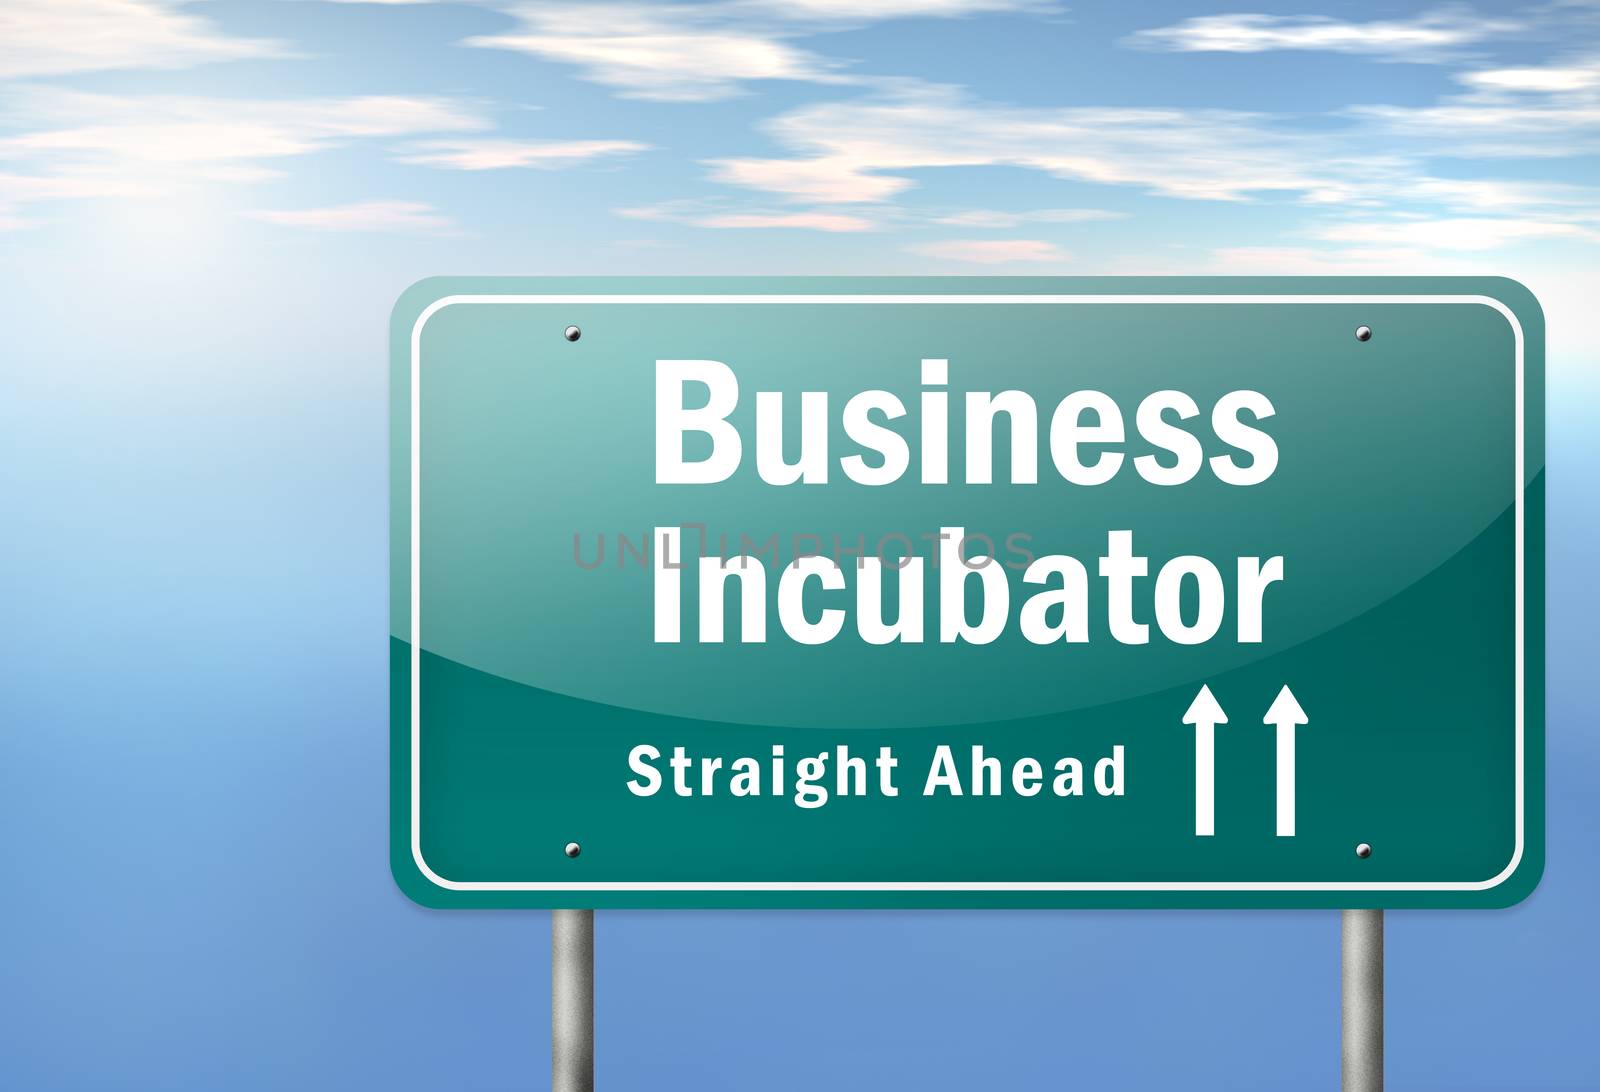 Highway Signpost with Business Incubator wording